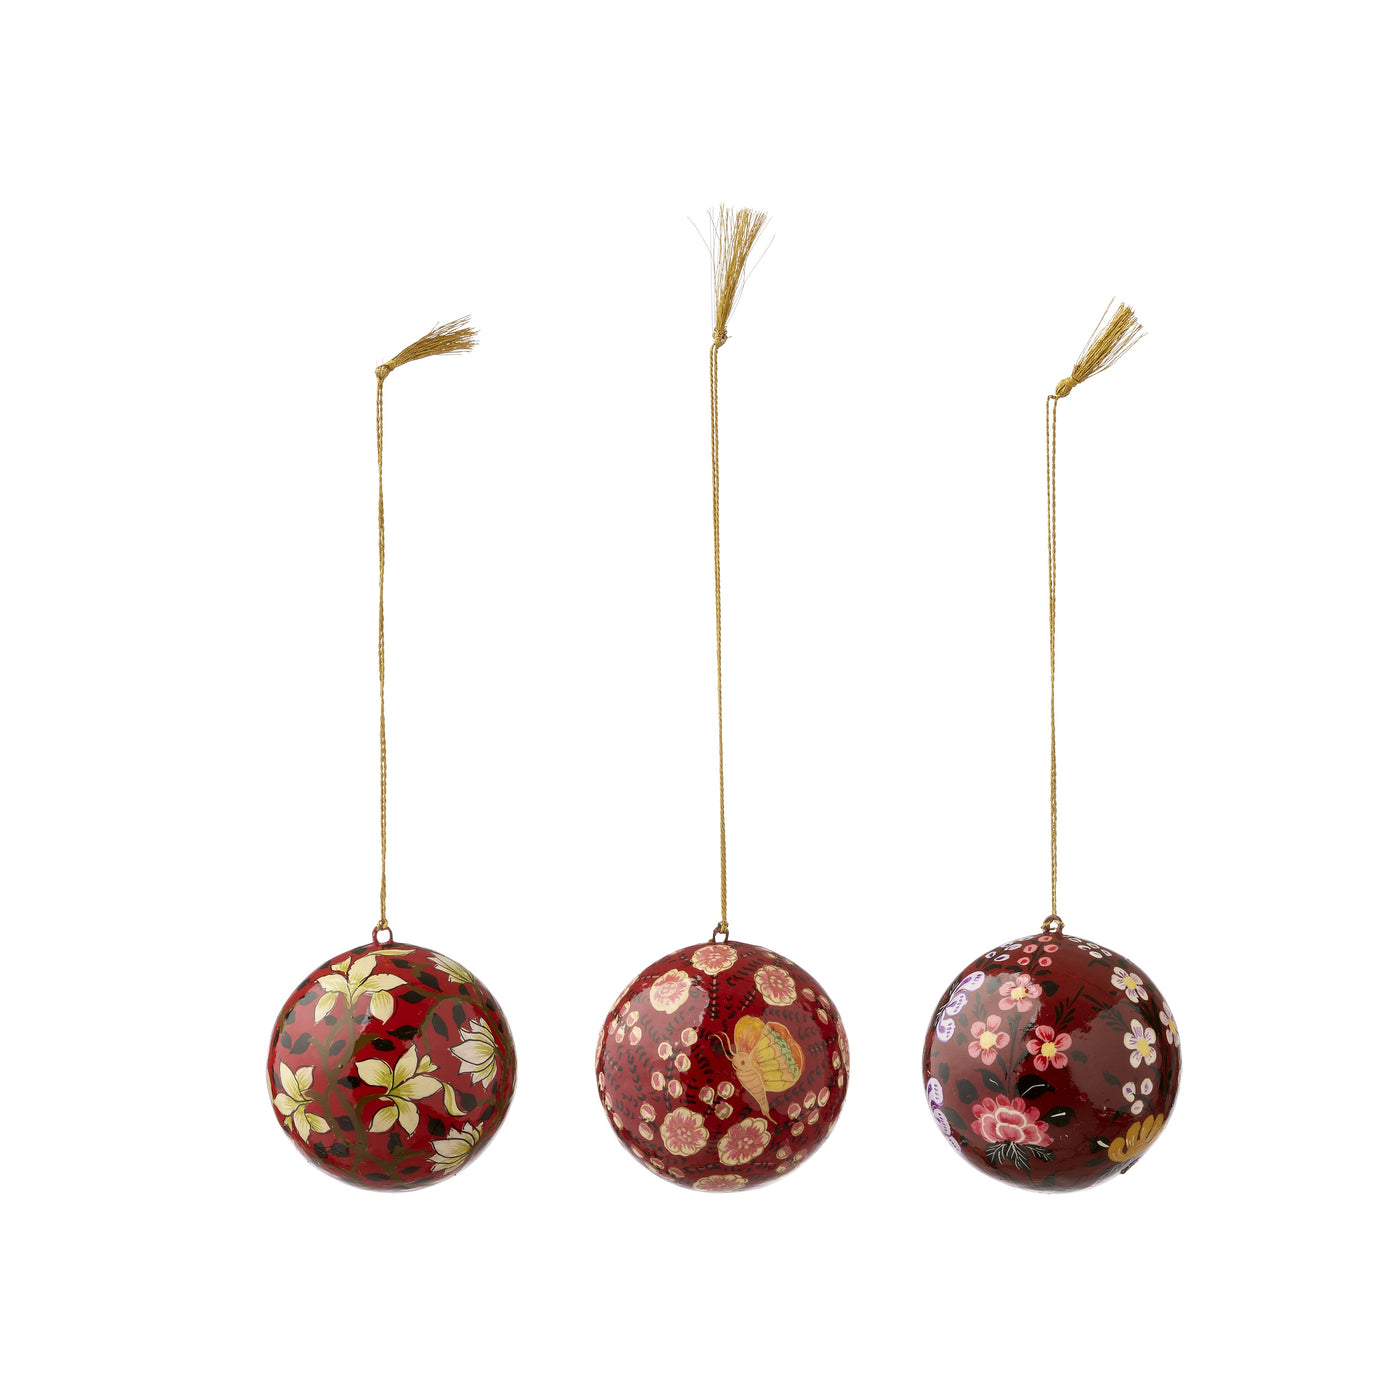 Box Sitapur Ruby Red Bauble Decorations